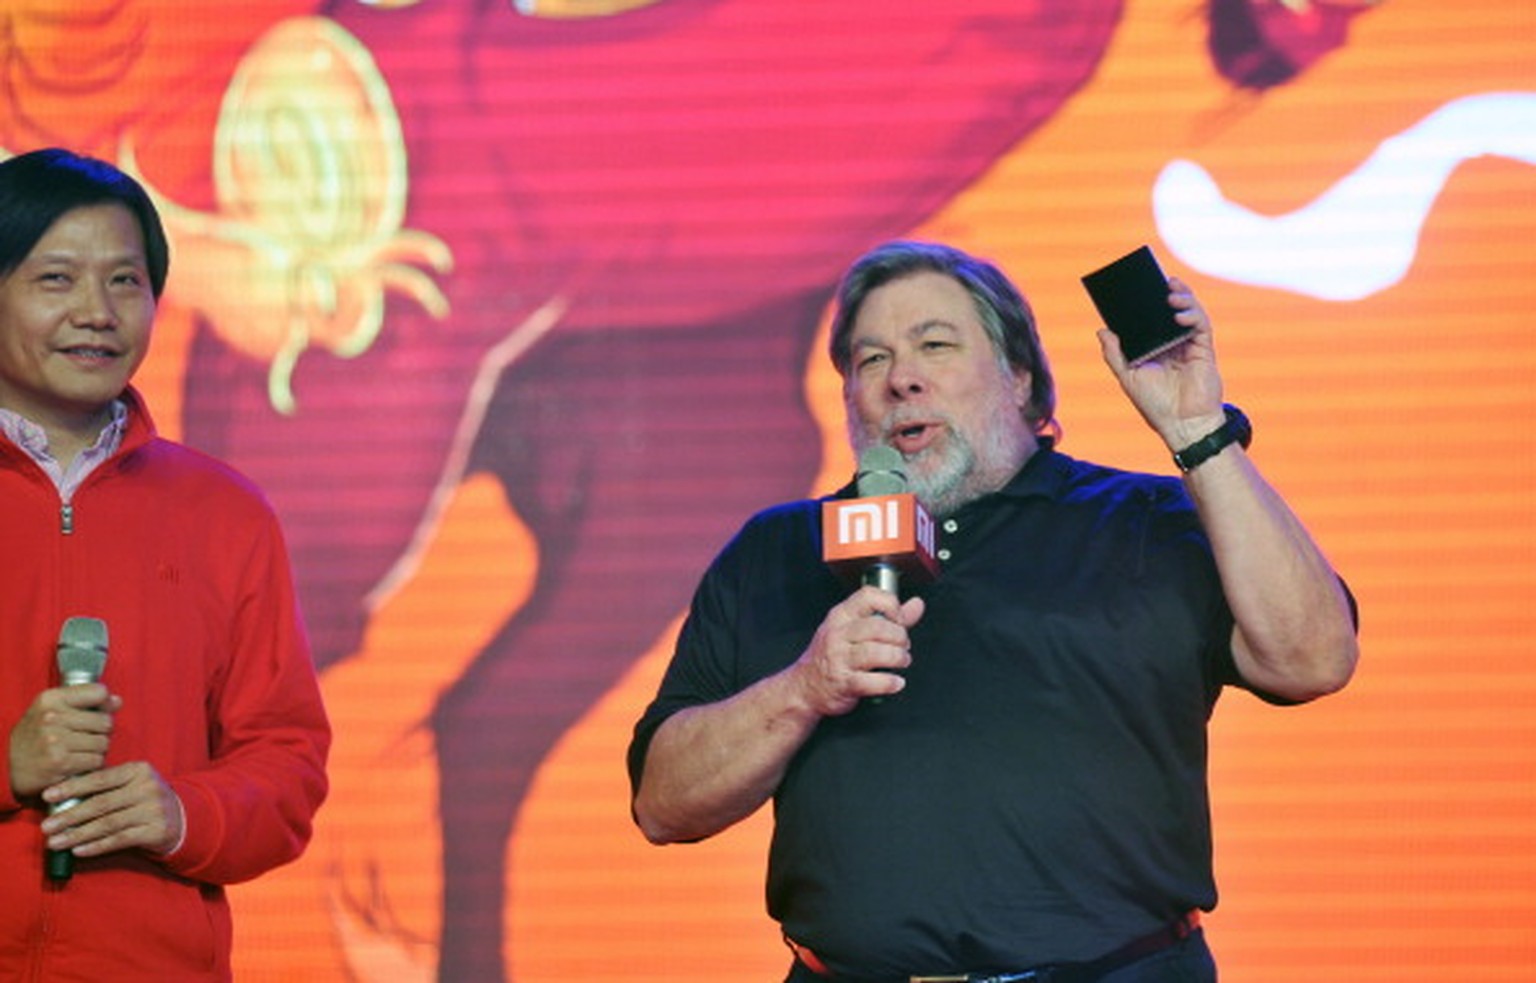 BEIJING, CHINA - JANUARY 10: (CHINA OUT) Xiaomi CEO Lei Jun (L) and Steve Wozniak, co-founder of Apple Inc. and chief scientist of Fusion-io Inc., attend the Xiaomi 2013 Annual Conference at China Nat ...